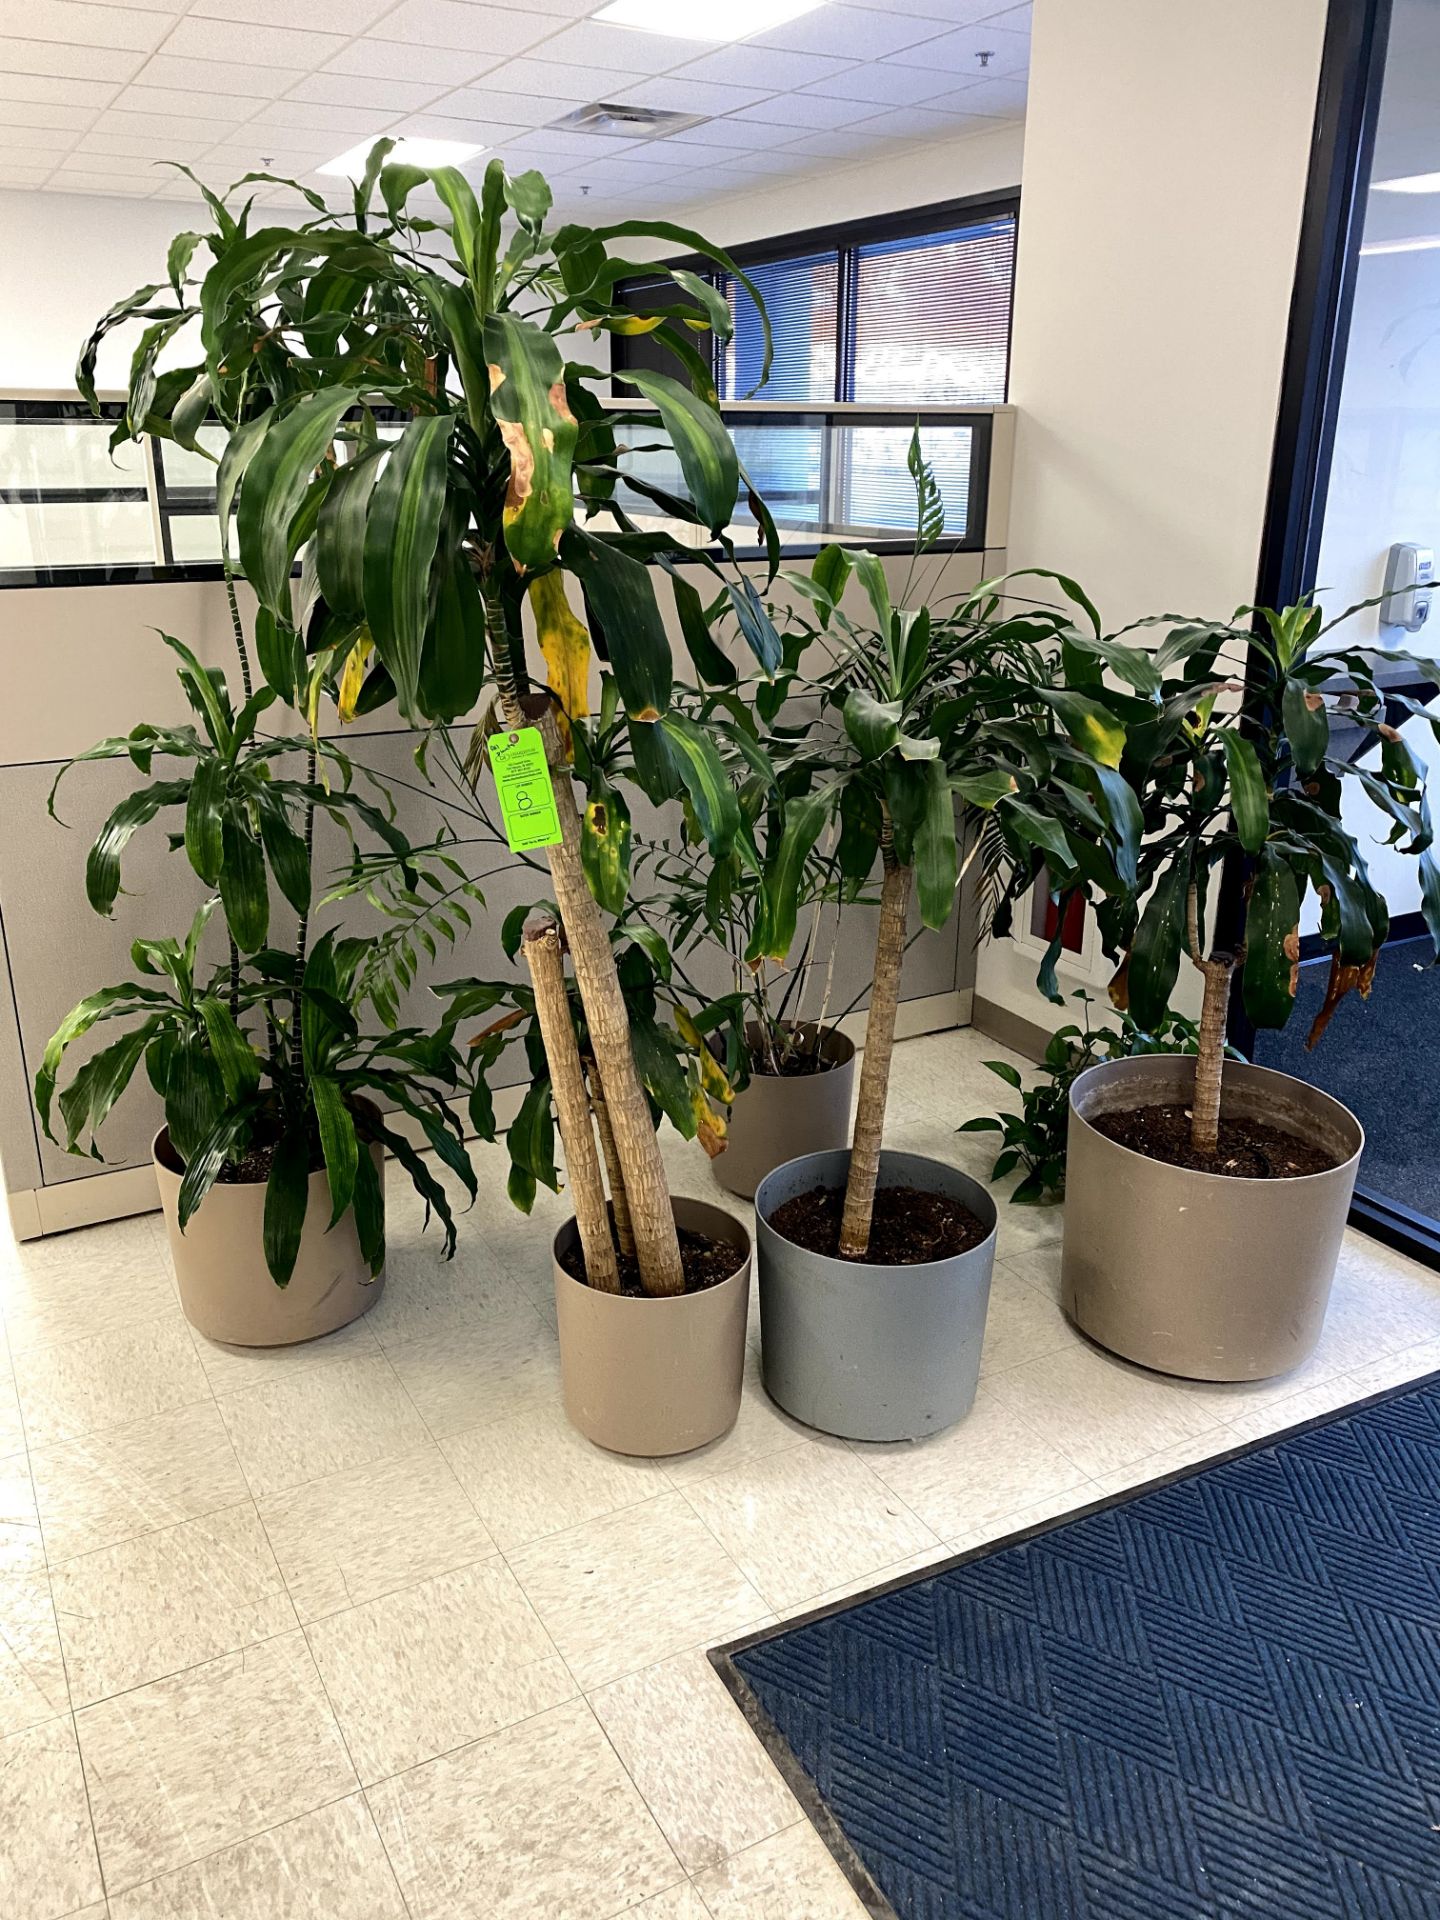 (6) POTTED PLANT(S) -- (7625 OMNITECH PLACE VICTOR NEW YORK)